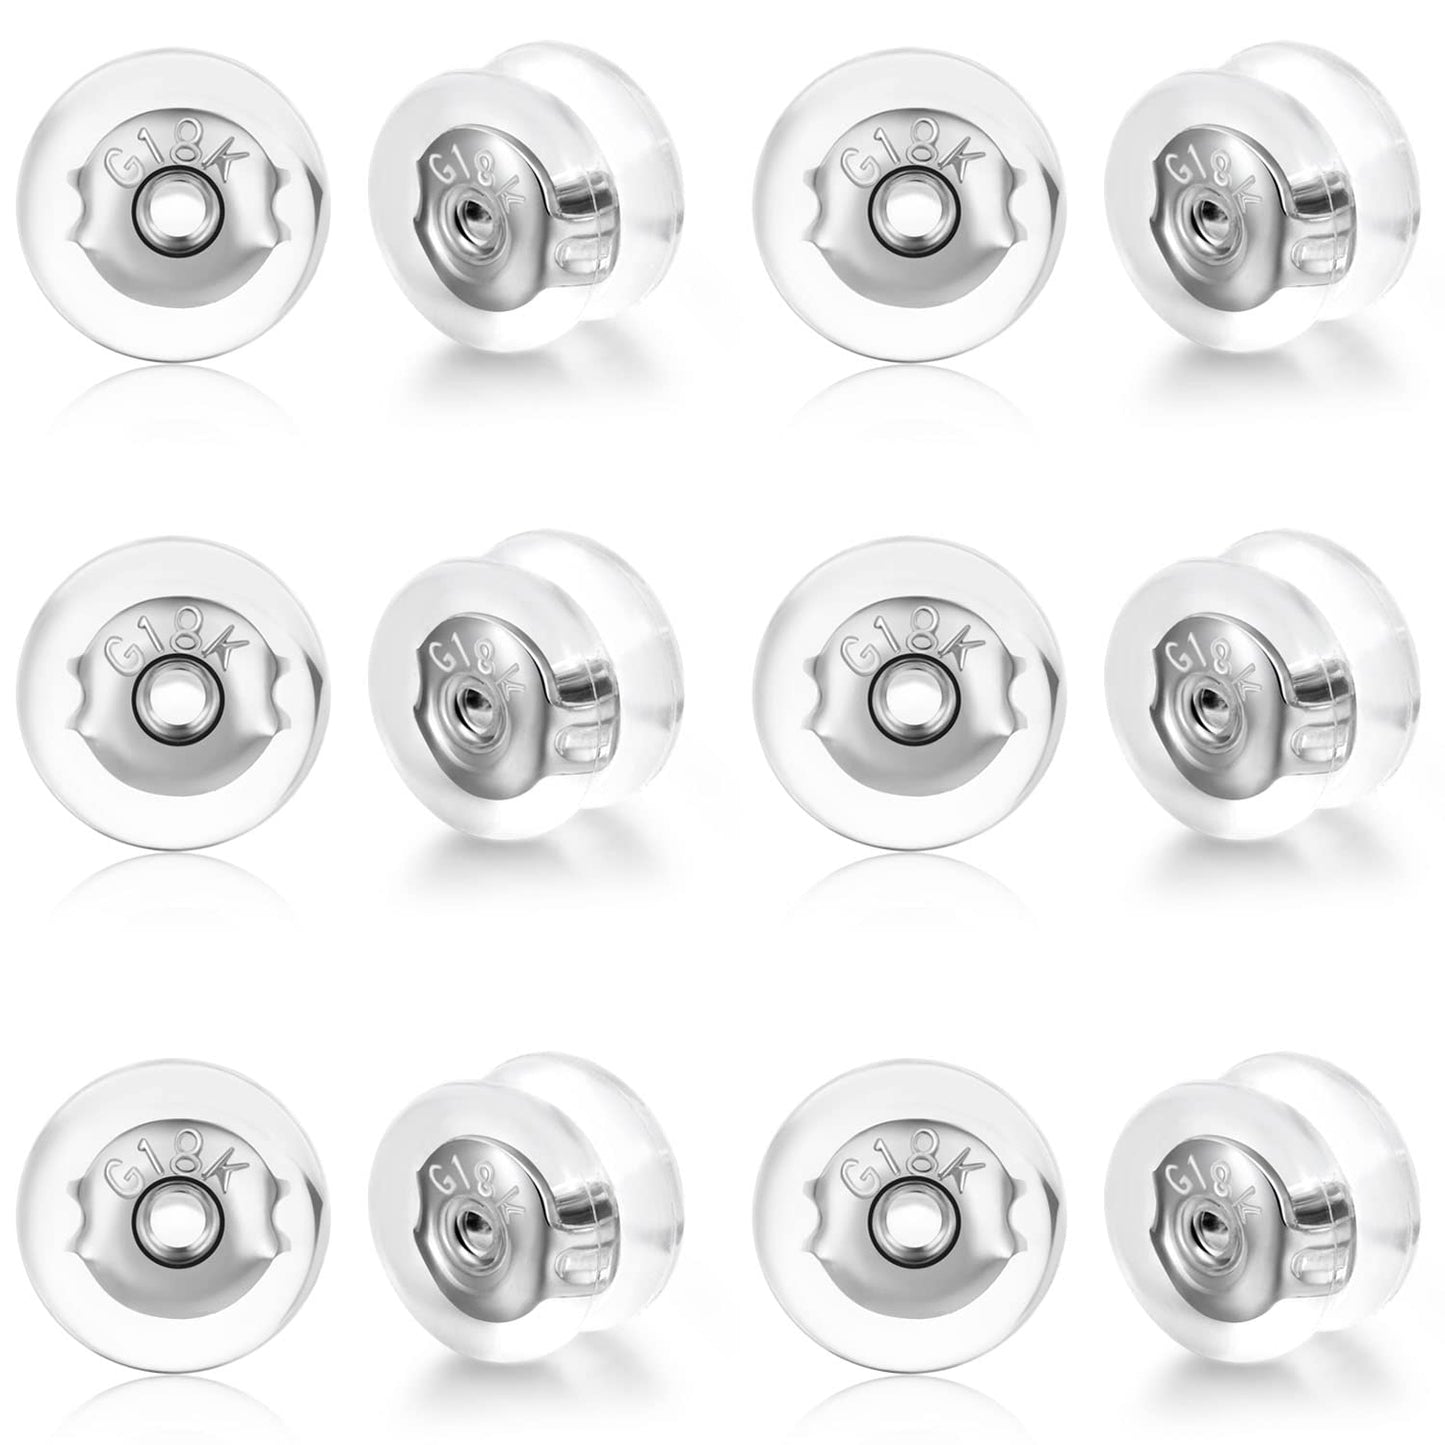 Sterling Silver Locking Secure Earring Backs for Studs Silicone Earring Backs Replacements for Studs Droopy Ears No-Irritate Hypoallergenice Earring Backs for Adults&Kid